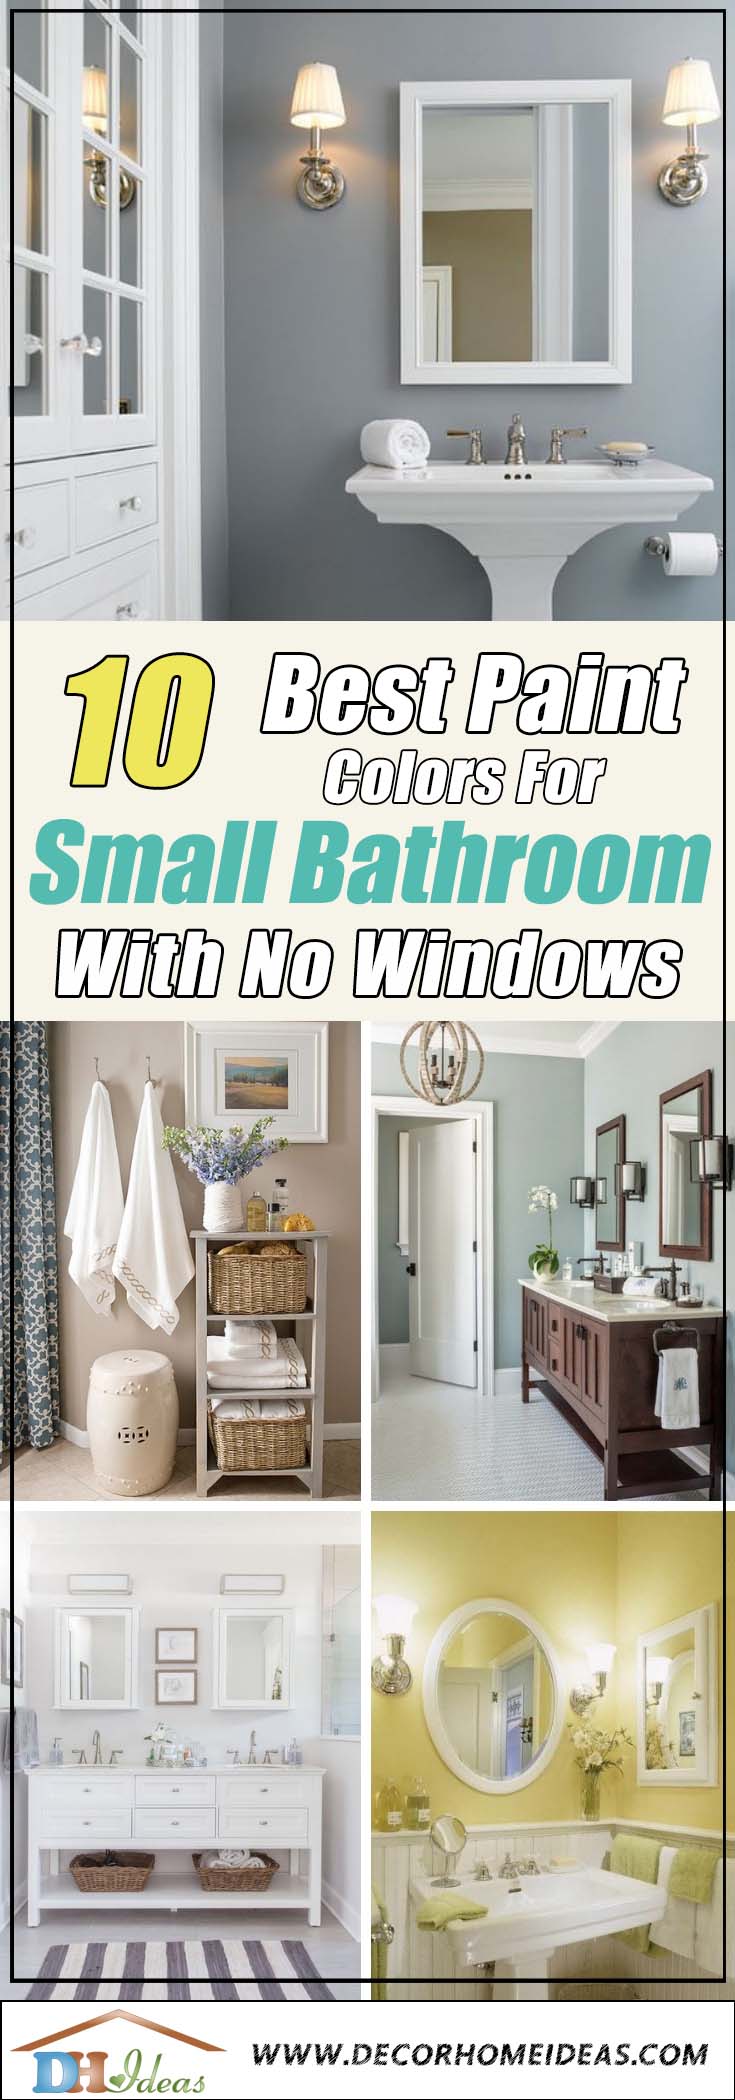 10 Best Paint Colors For Small Bathroom, What Is A Good Color For Small Bathroom